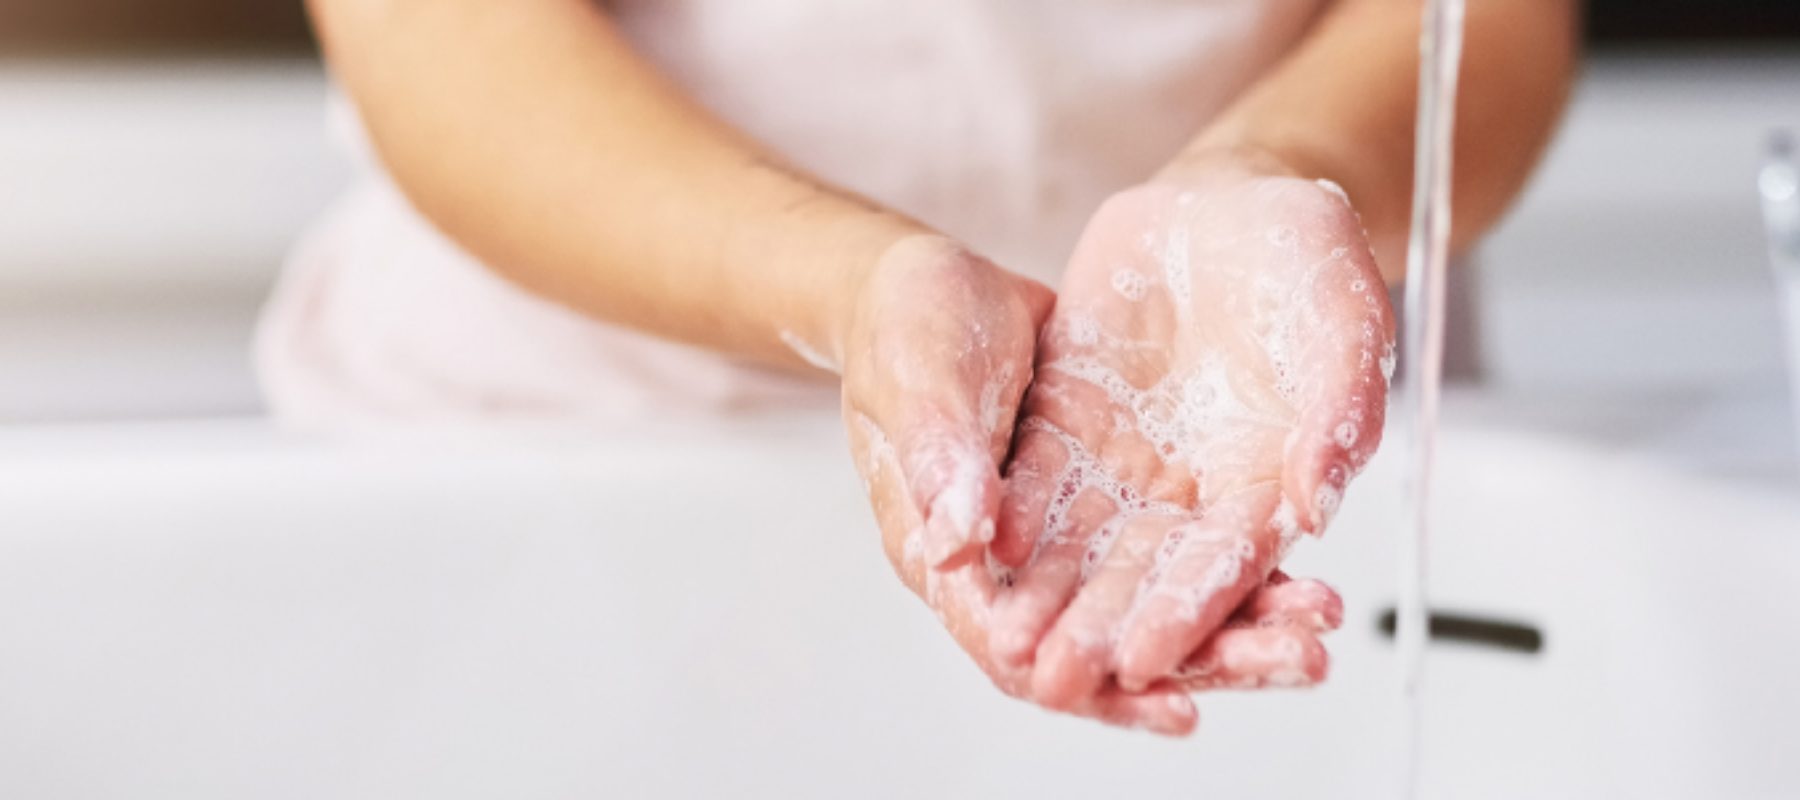 woman washing hands with soap and water